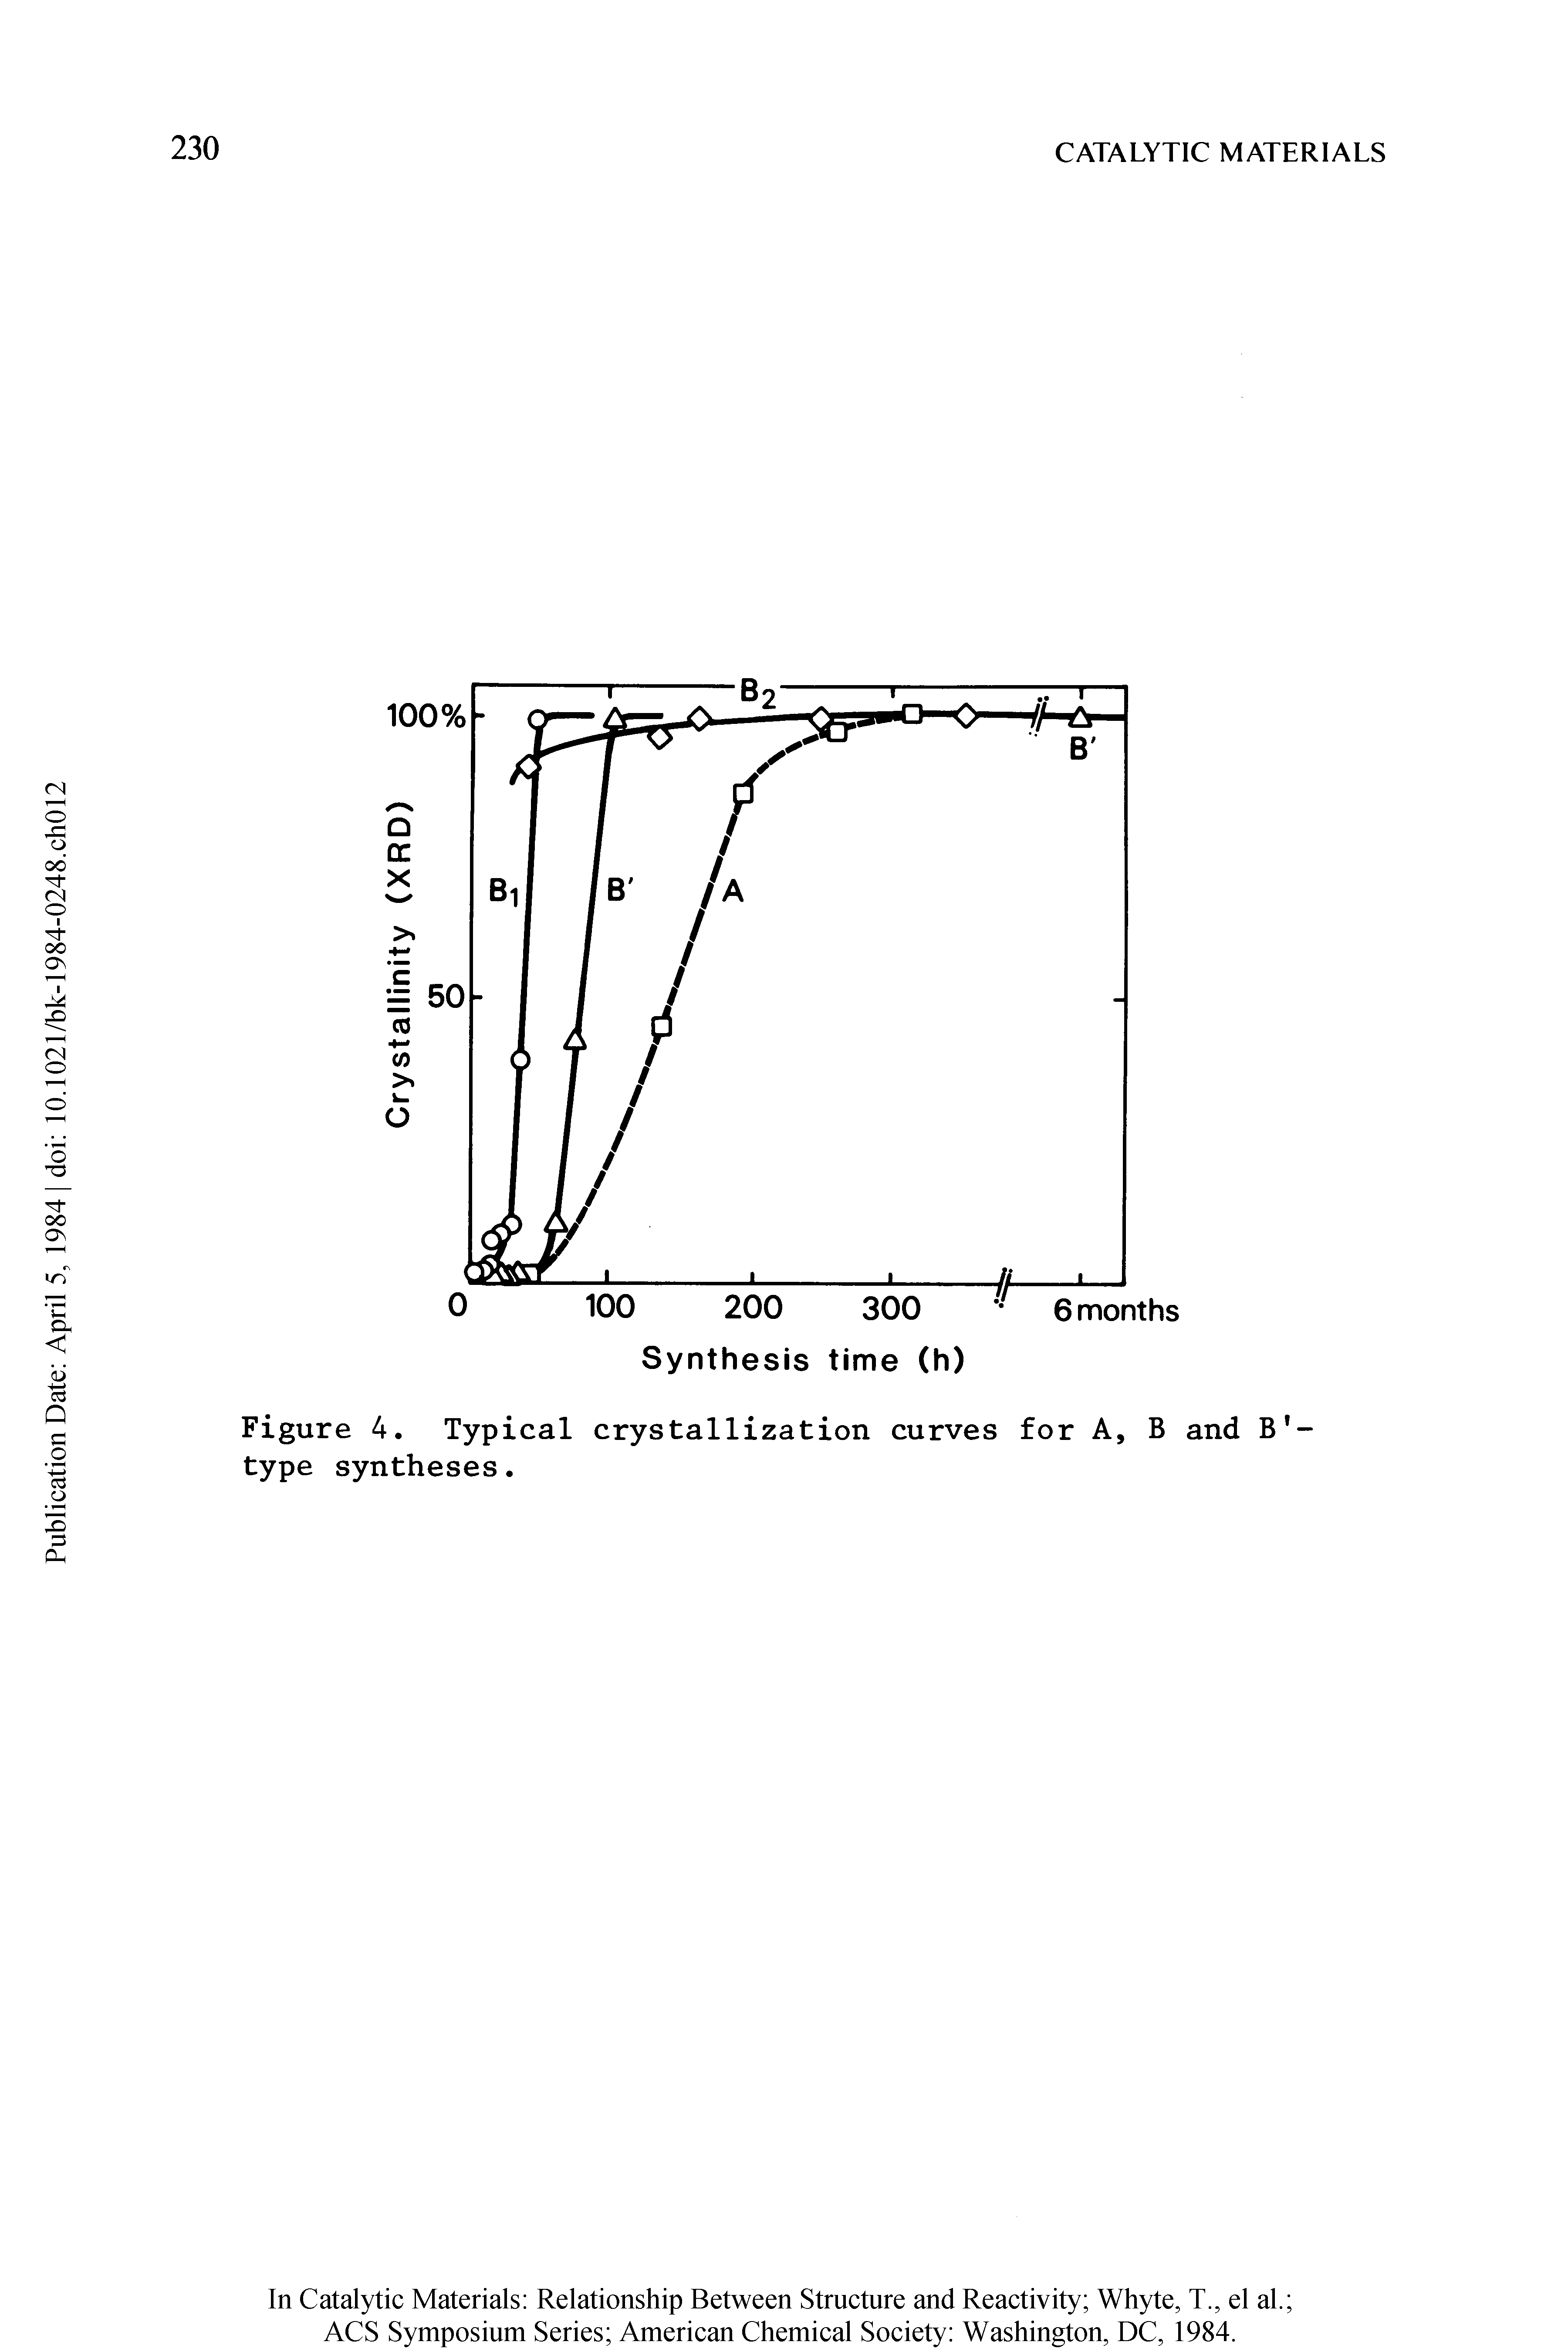 Figure 4. Typical crystallization curves for A, B and B -type syntheses.